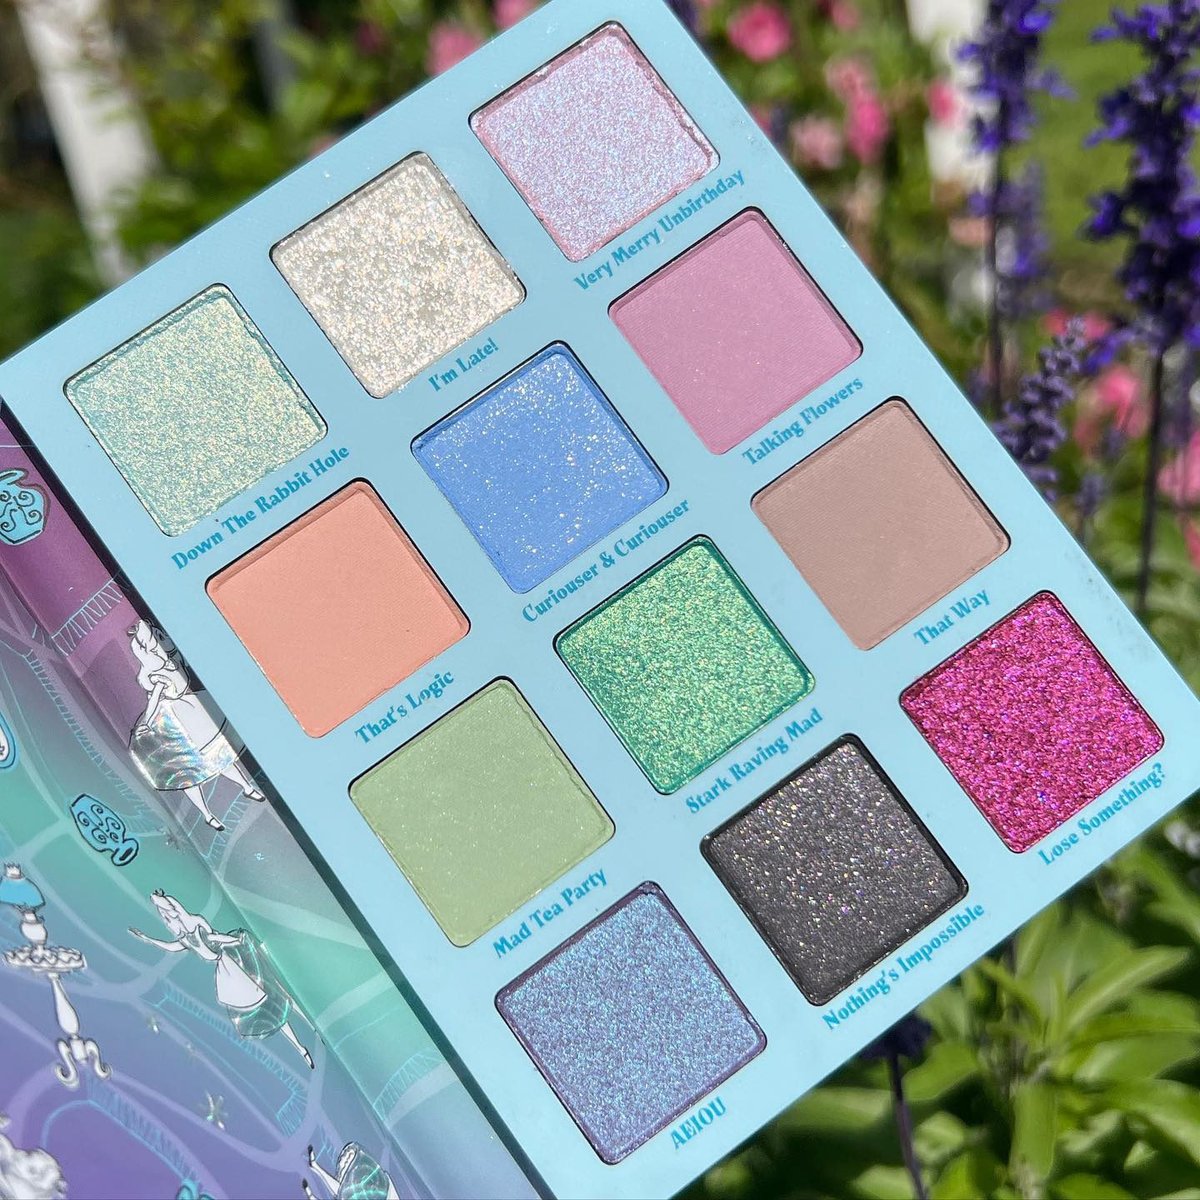 follow your curiosity with the Lost in Wonderland palette 🐰🌀 featuring 12 matte, metallic, matte sparkle and pearlescent glitter shades! 🎩

purchase the Disney Alice in Wonderland and ColourPop Collection NOW at @ultabeauty in-stores and online! 🛒🧡

IG: rosybeautylove